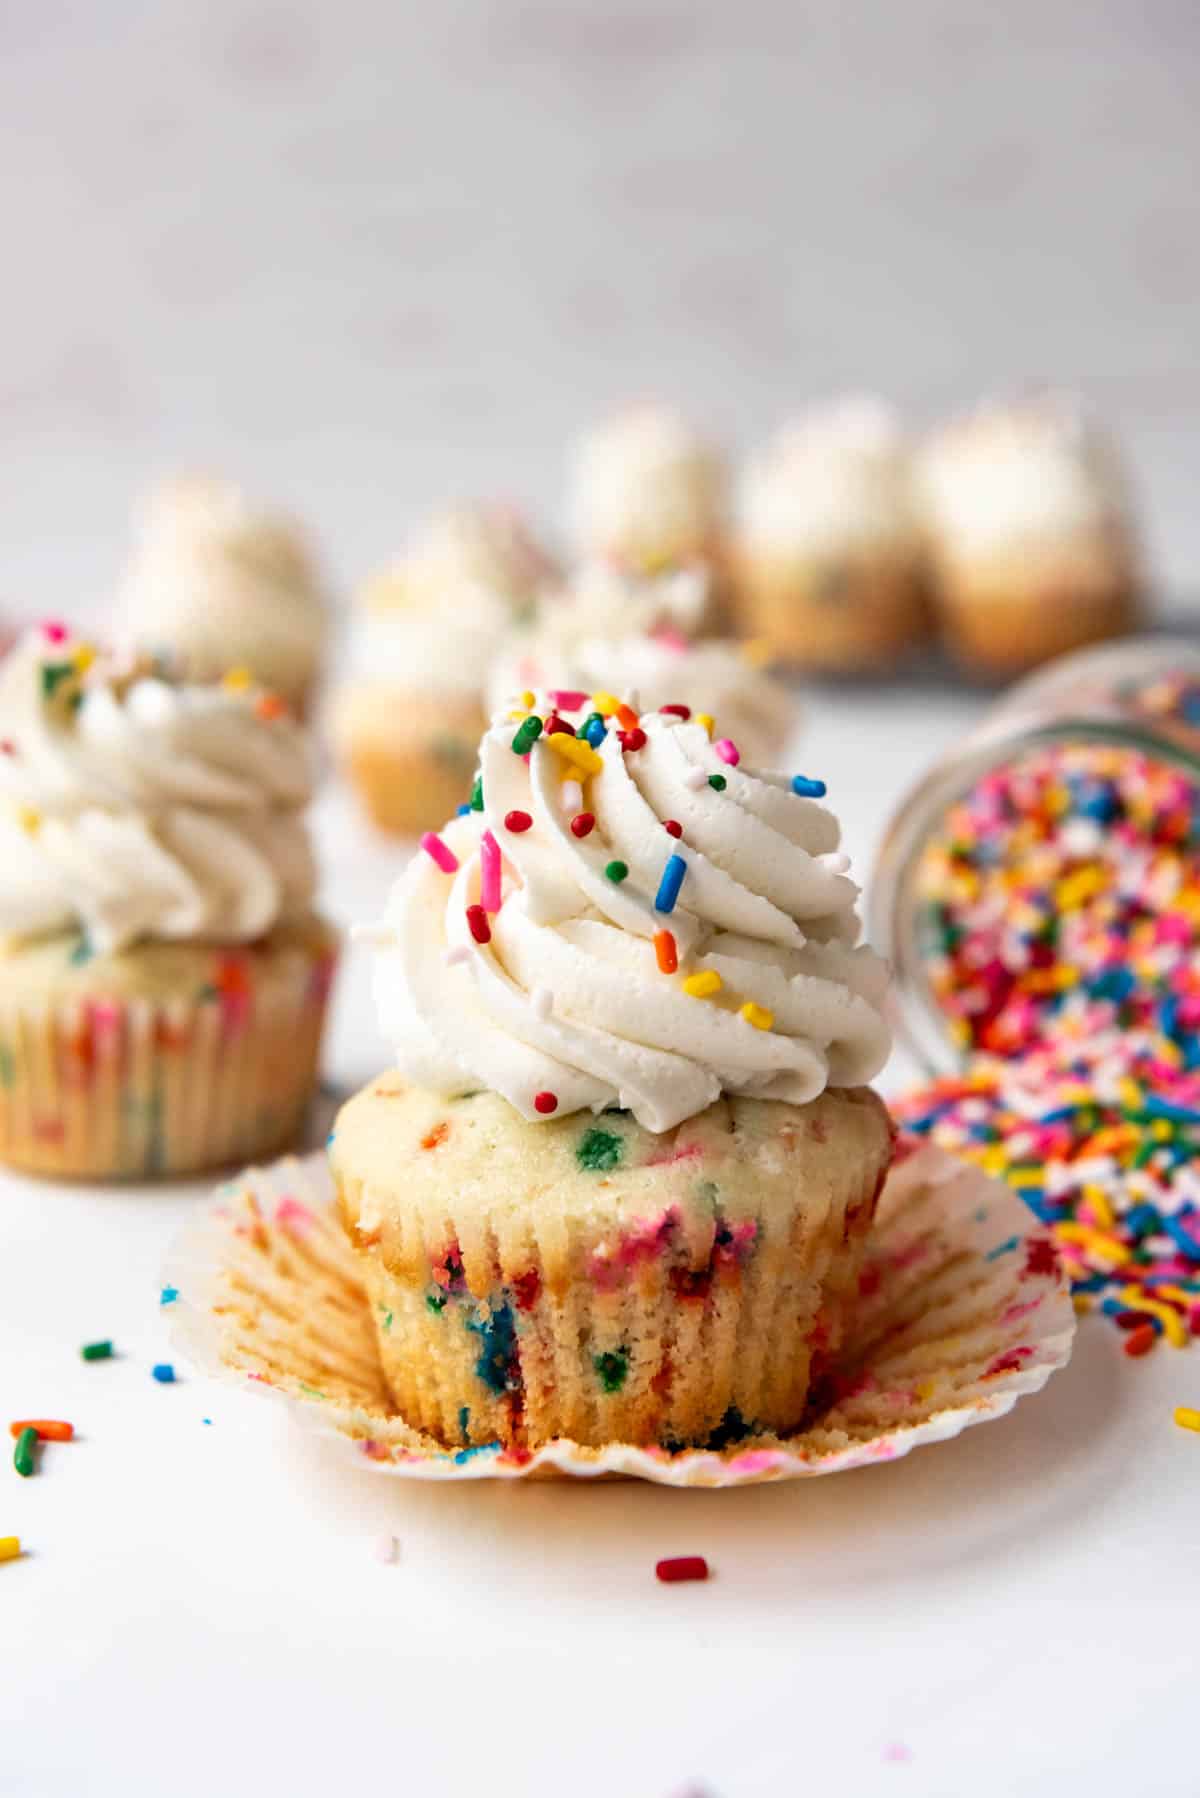 A homemade funfetti cupcake that has been unwrapped from its paper wrapper.